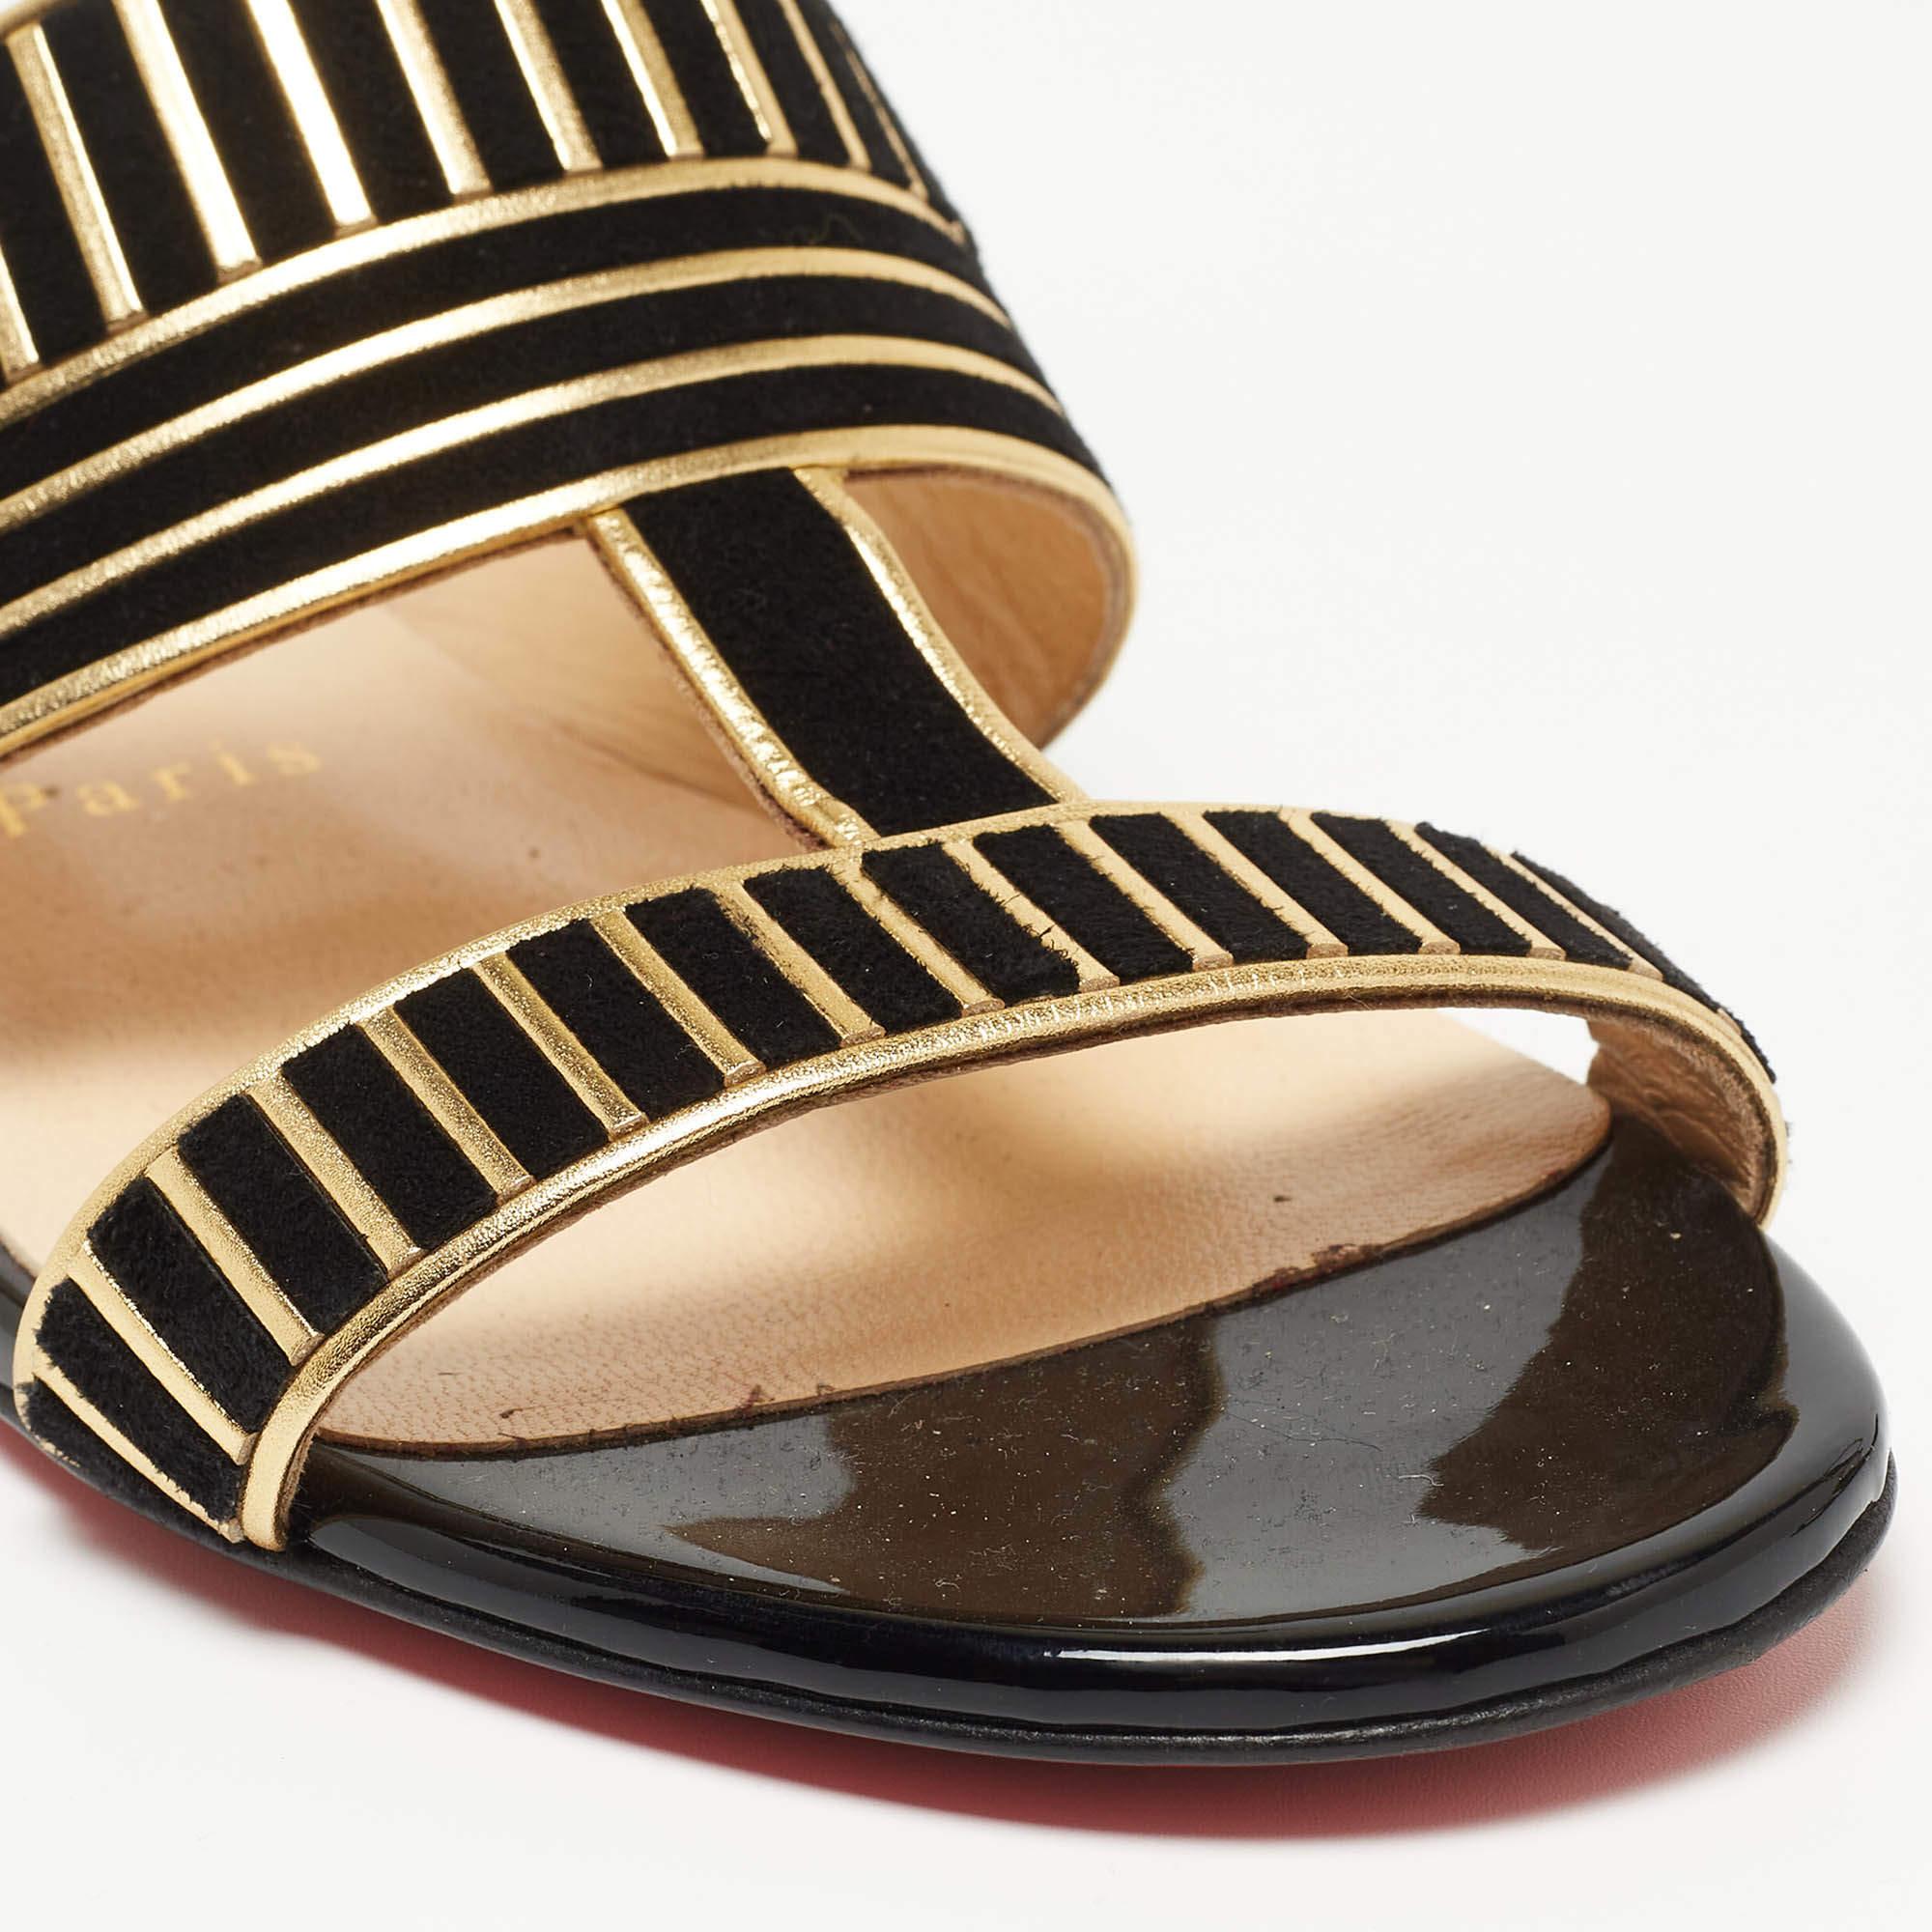 Christian Louboutin Black Suede and Leather Striped Flat Sandals Size 36 1